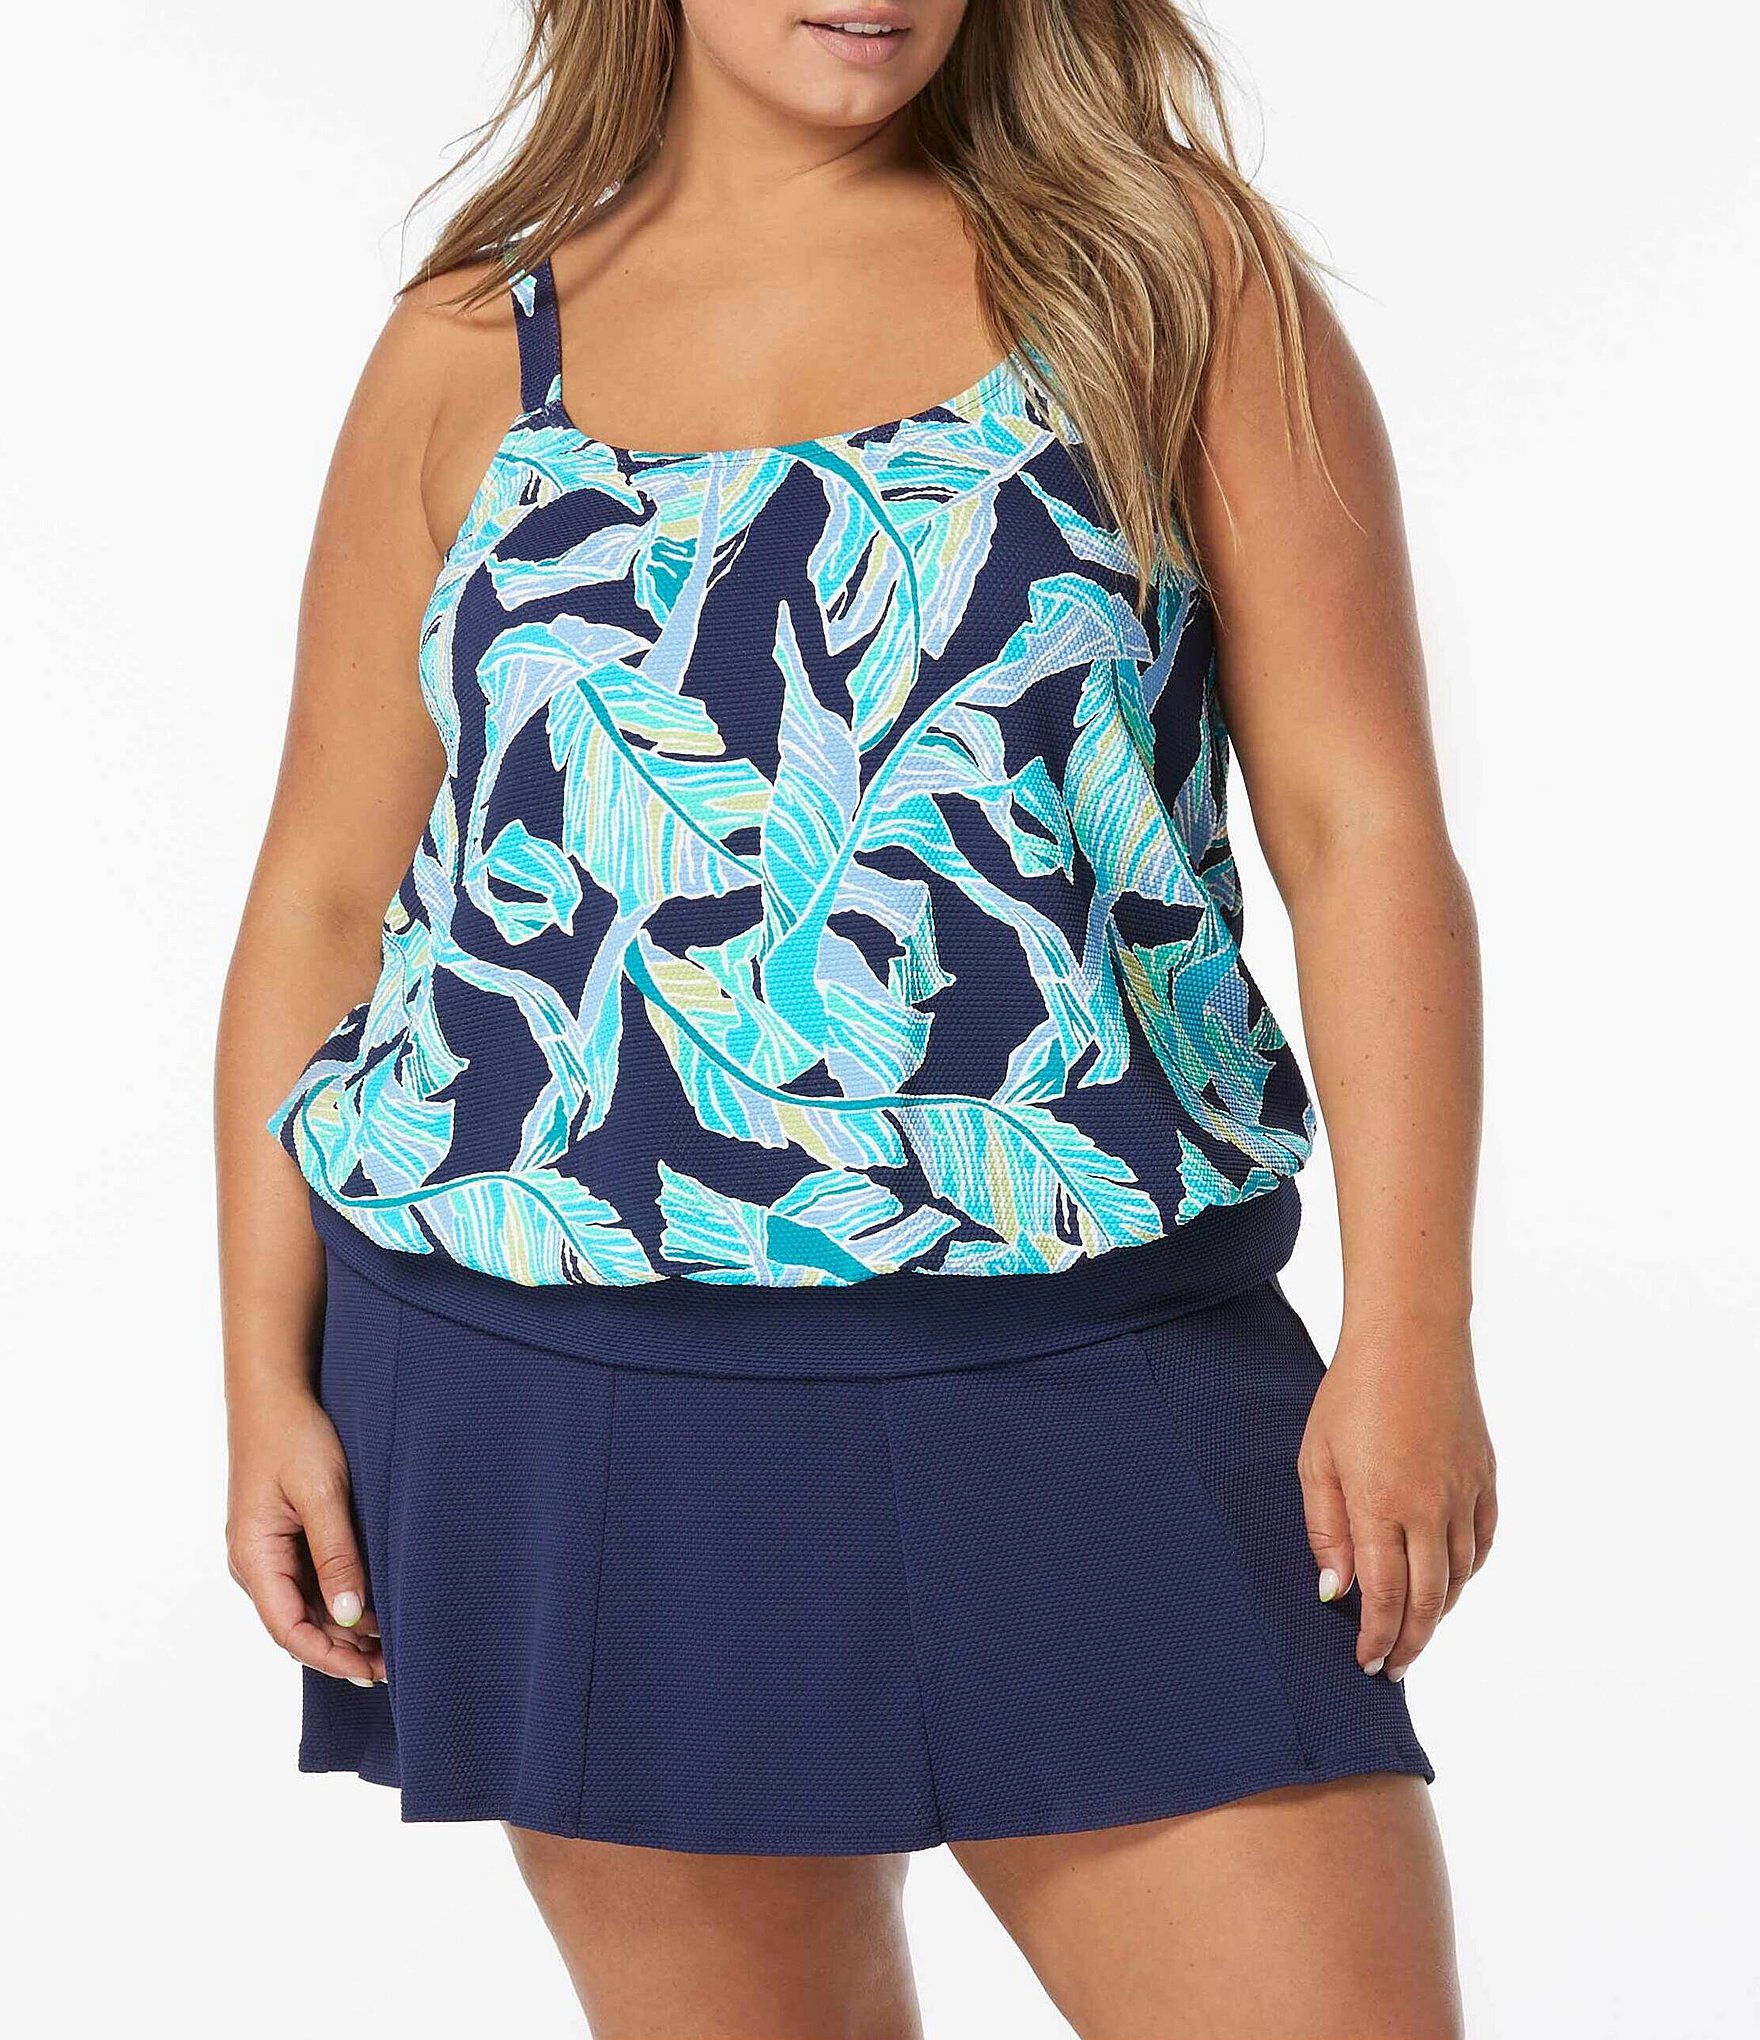 Beach House Plus Size Julie Tankini Top - Between the Lines